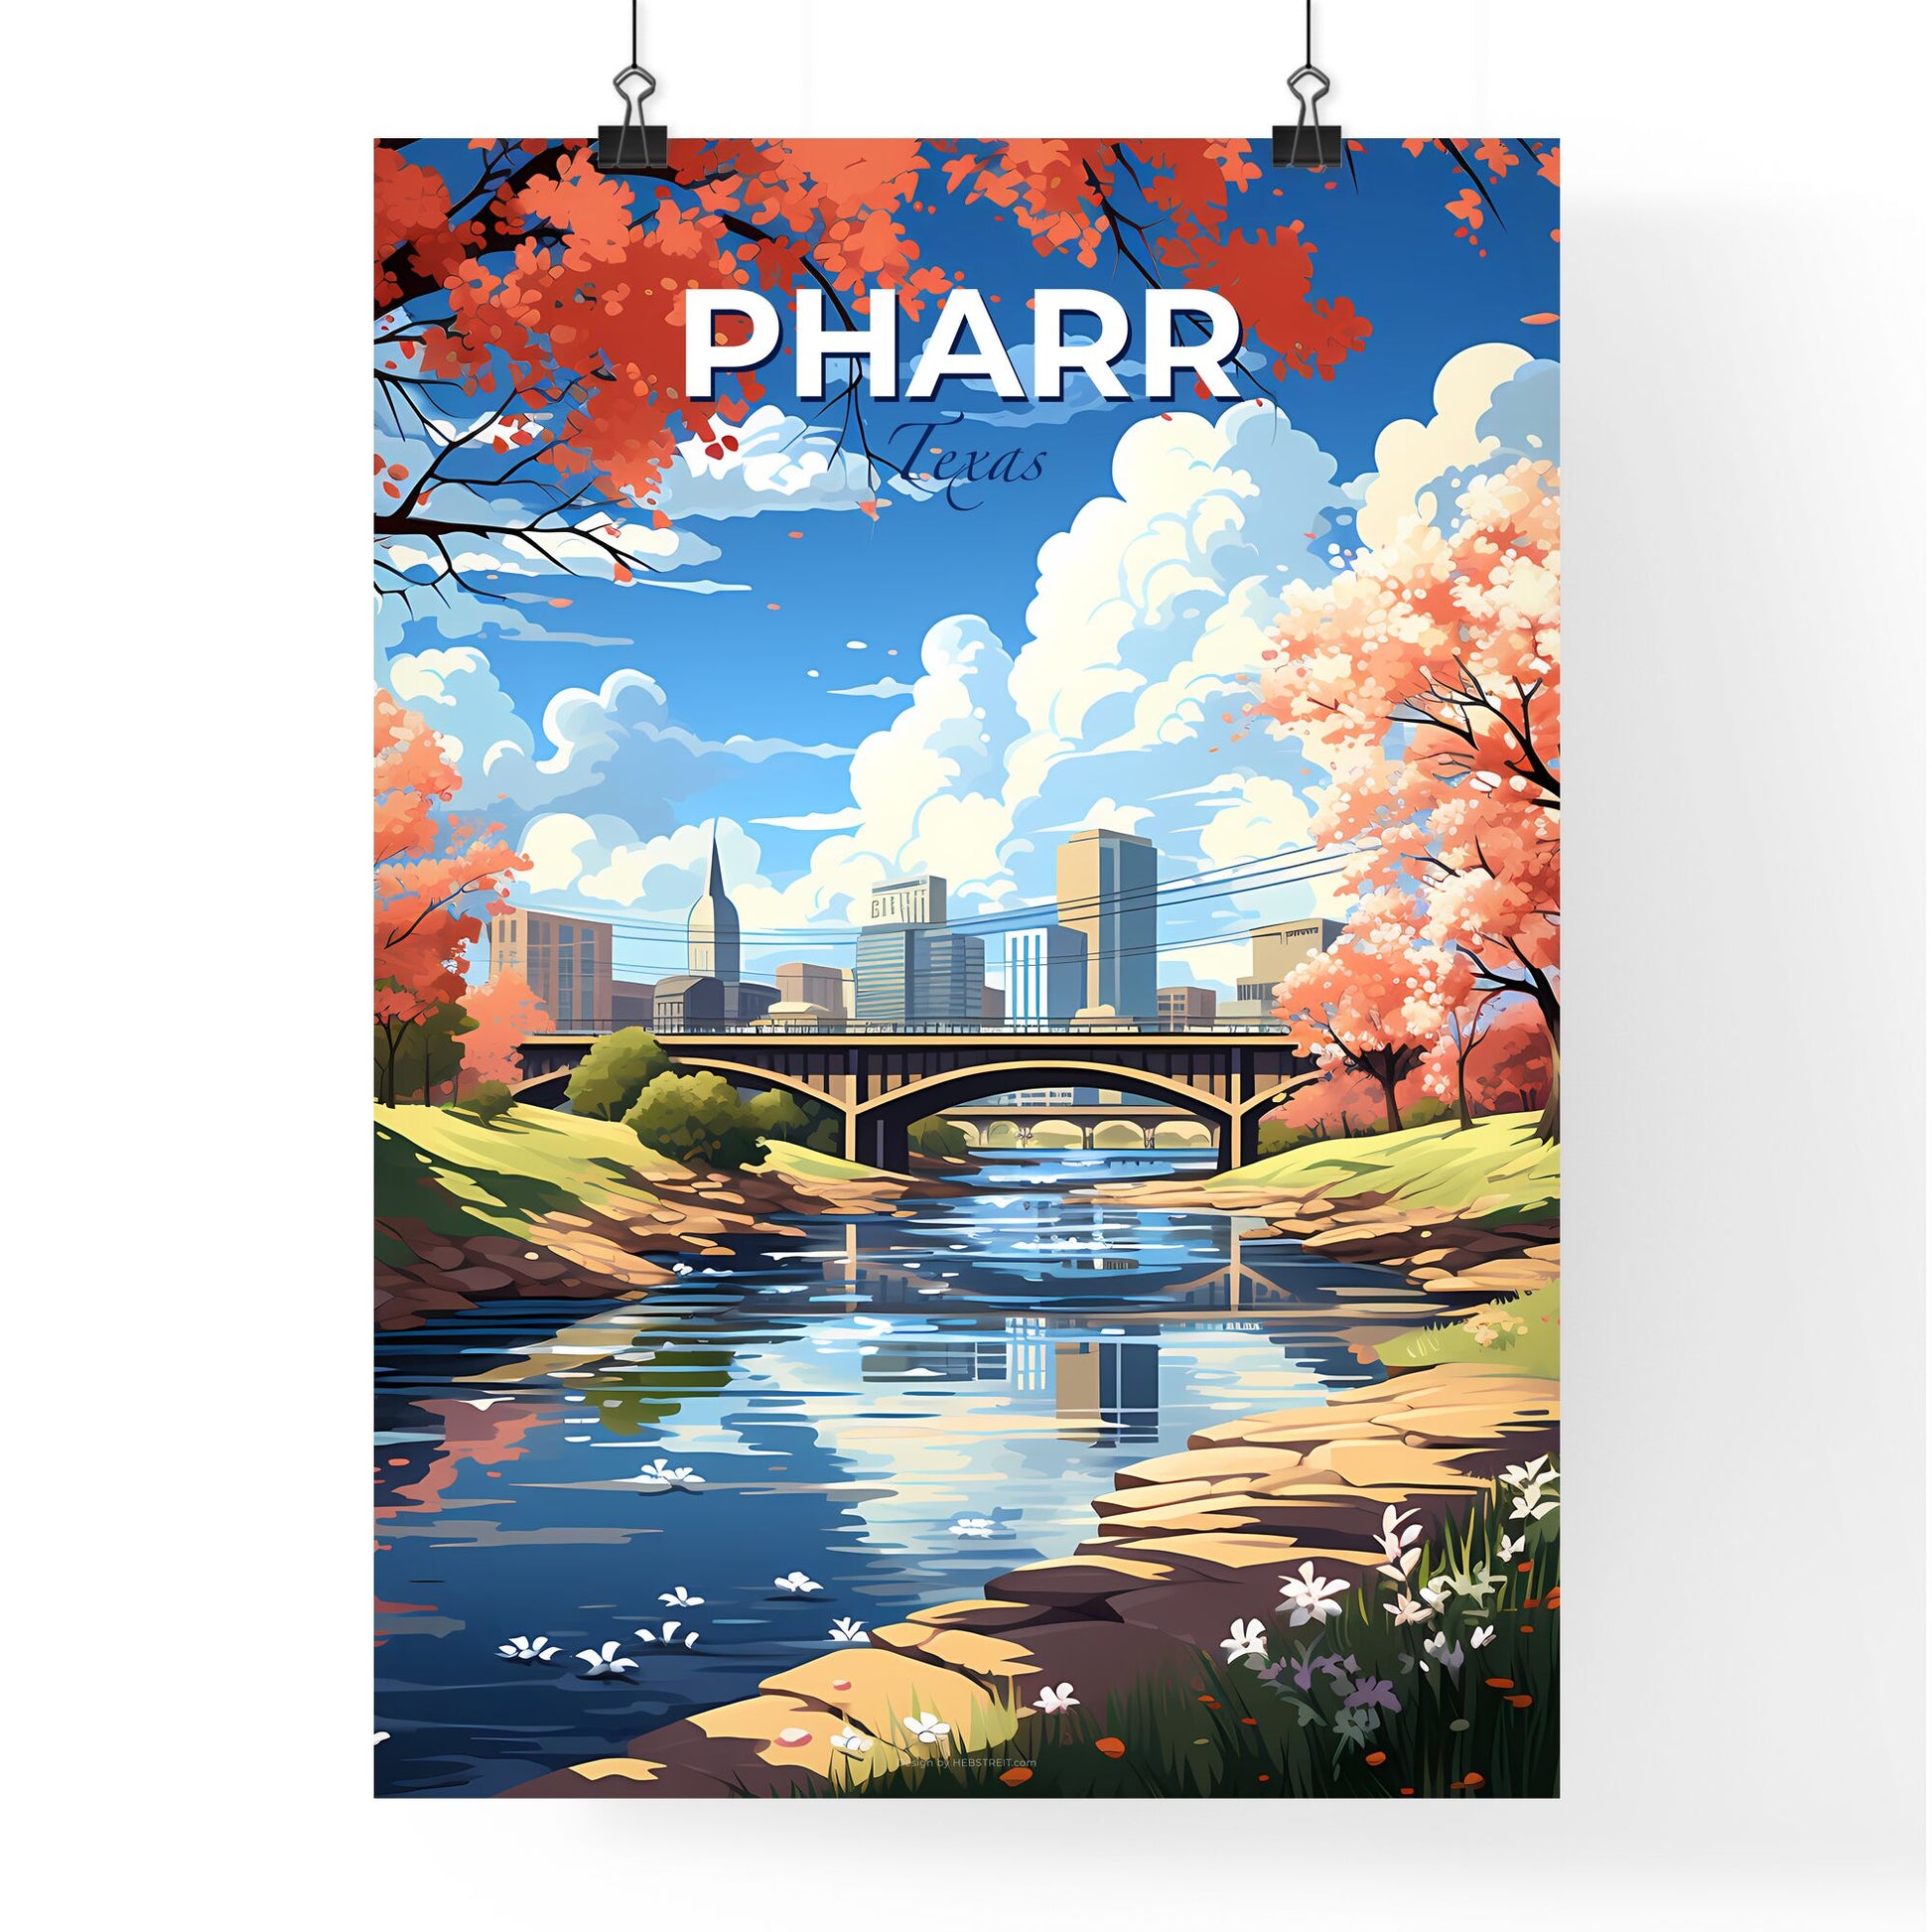 Pharr, Texas, A Poster of a river with a bridge and trees and a city in the background Default Title